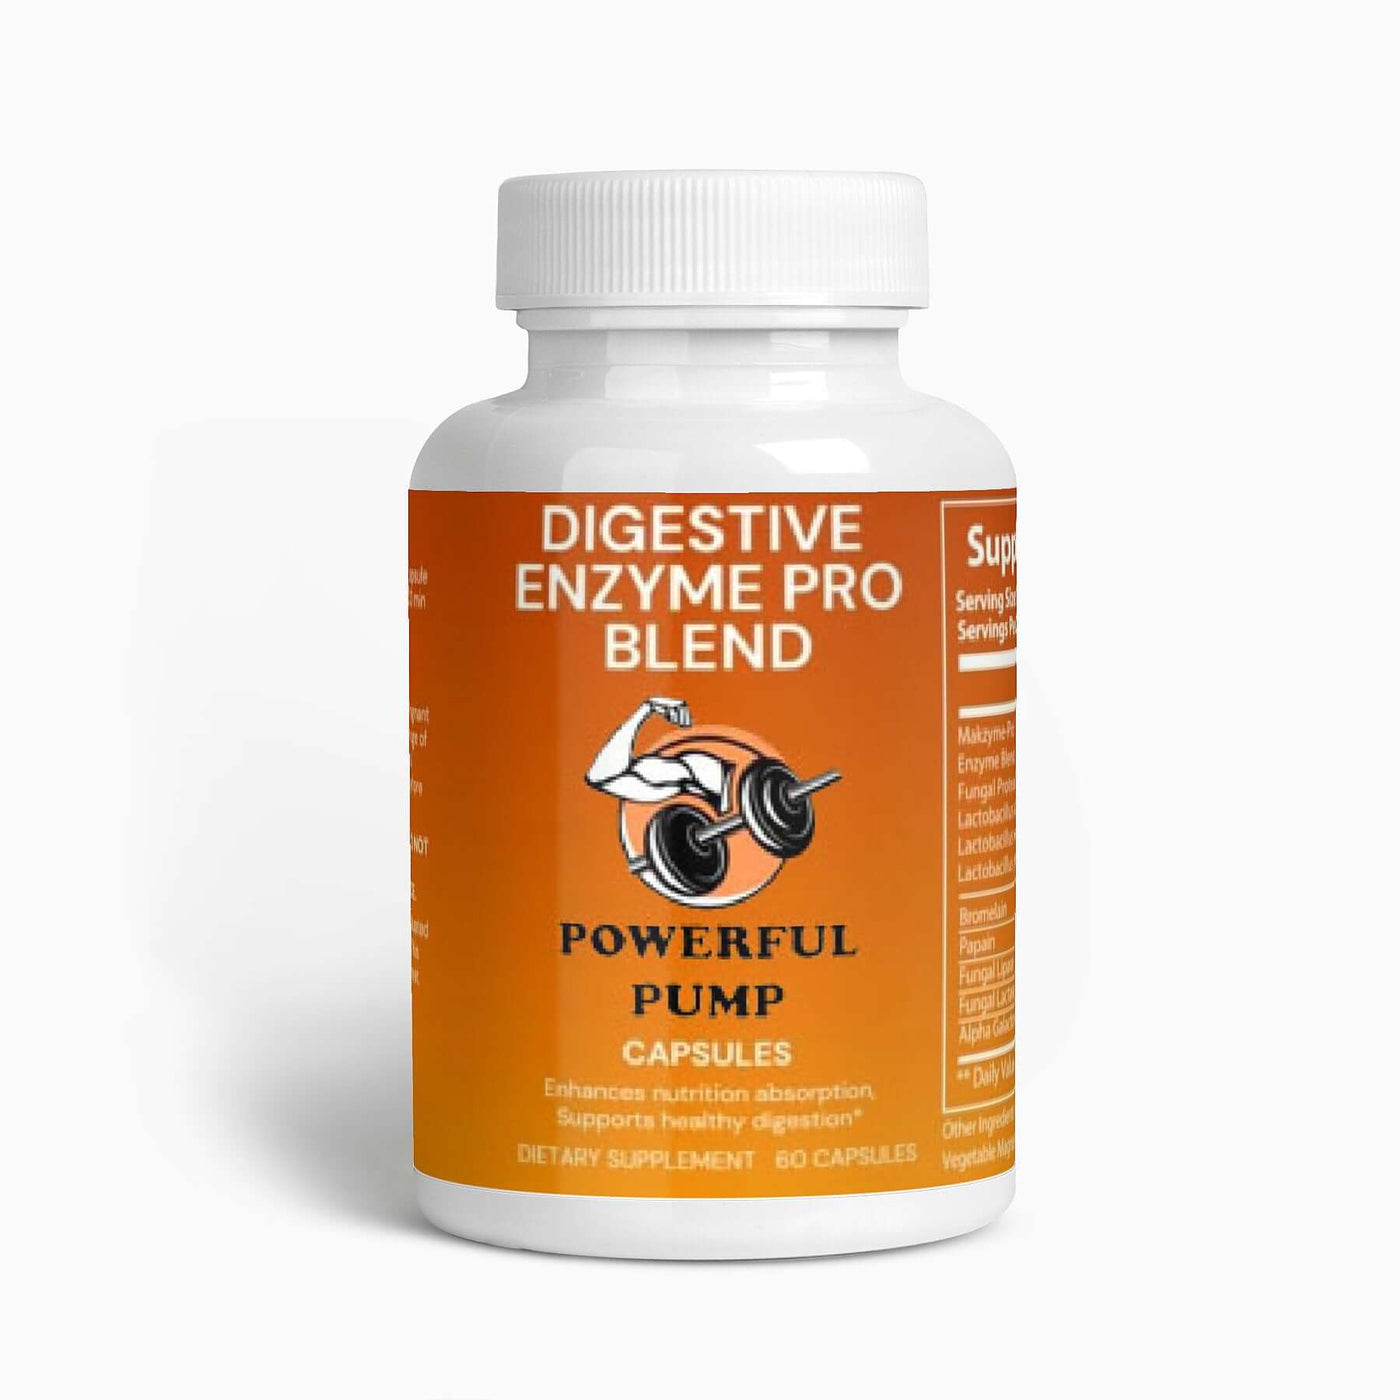 Digestive Enzyme Pro Blend: A bottle of Digestive Enzyme Pro Blend supplement, aiding in optimal digestion and nutrient absorption for digestive wellness.